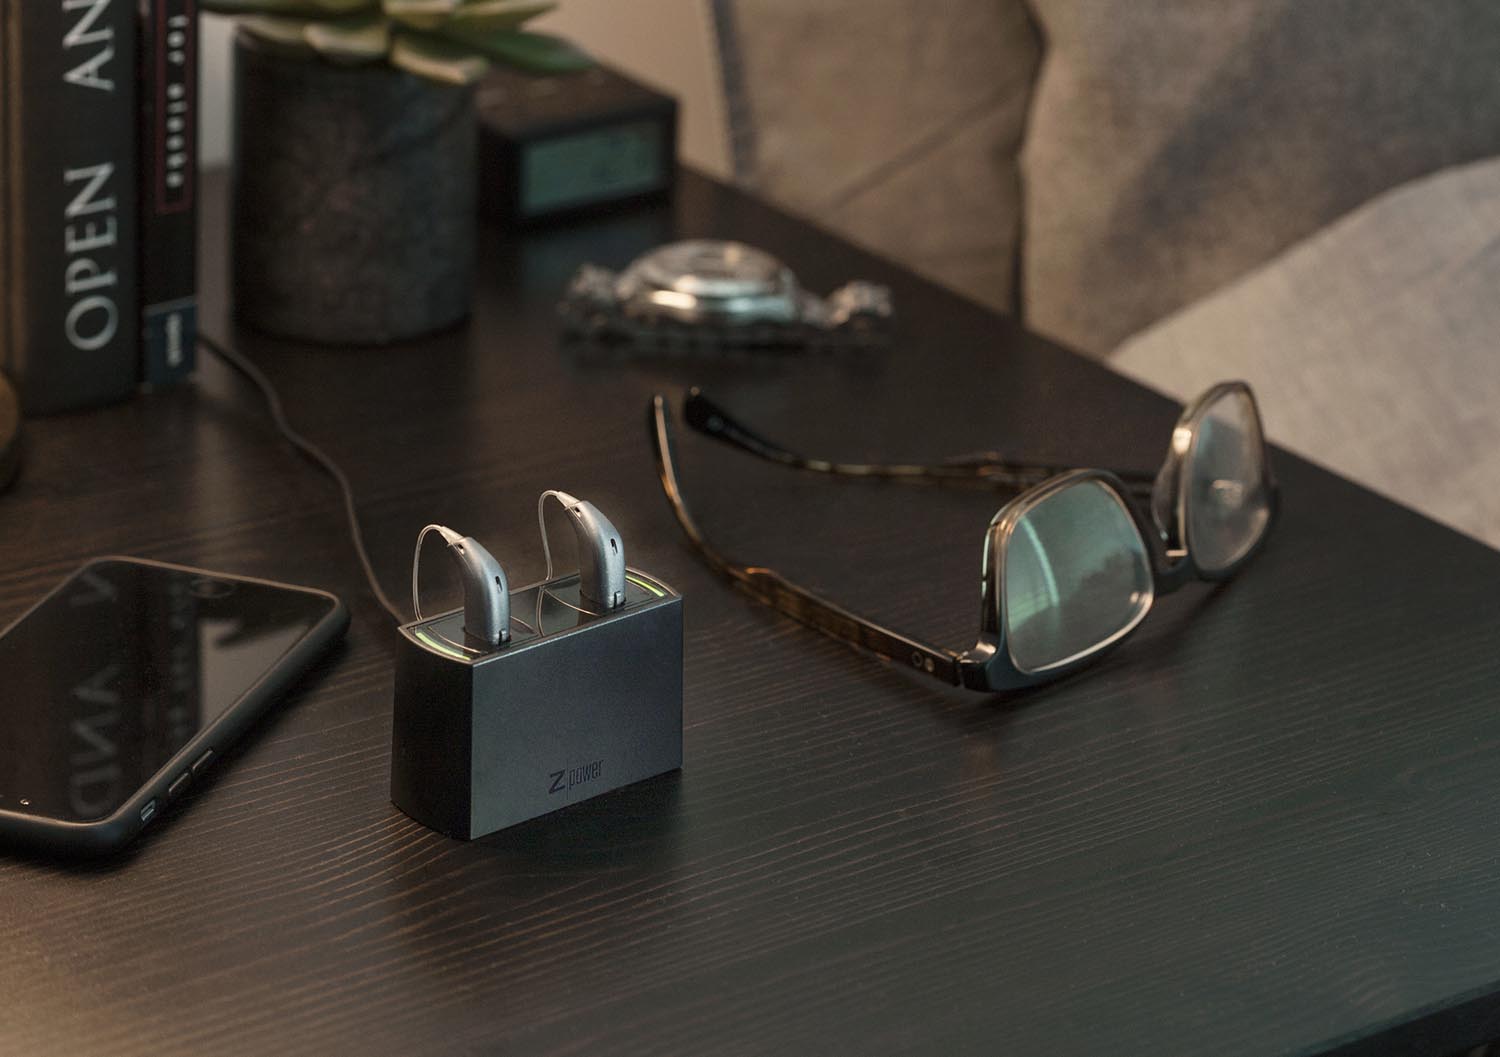 Option Opn hearing aids charging on a bedside table with Z-Power charger